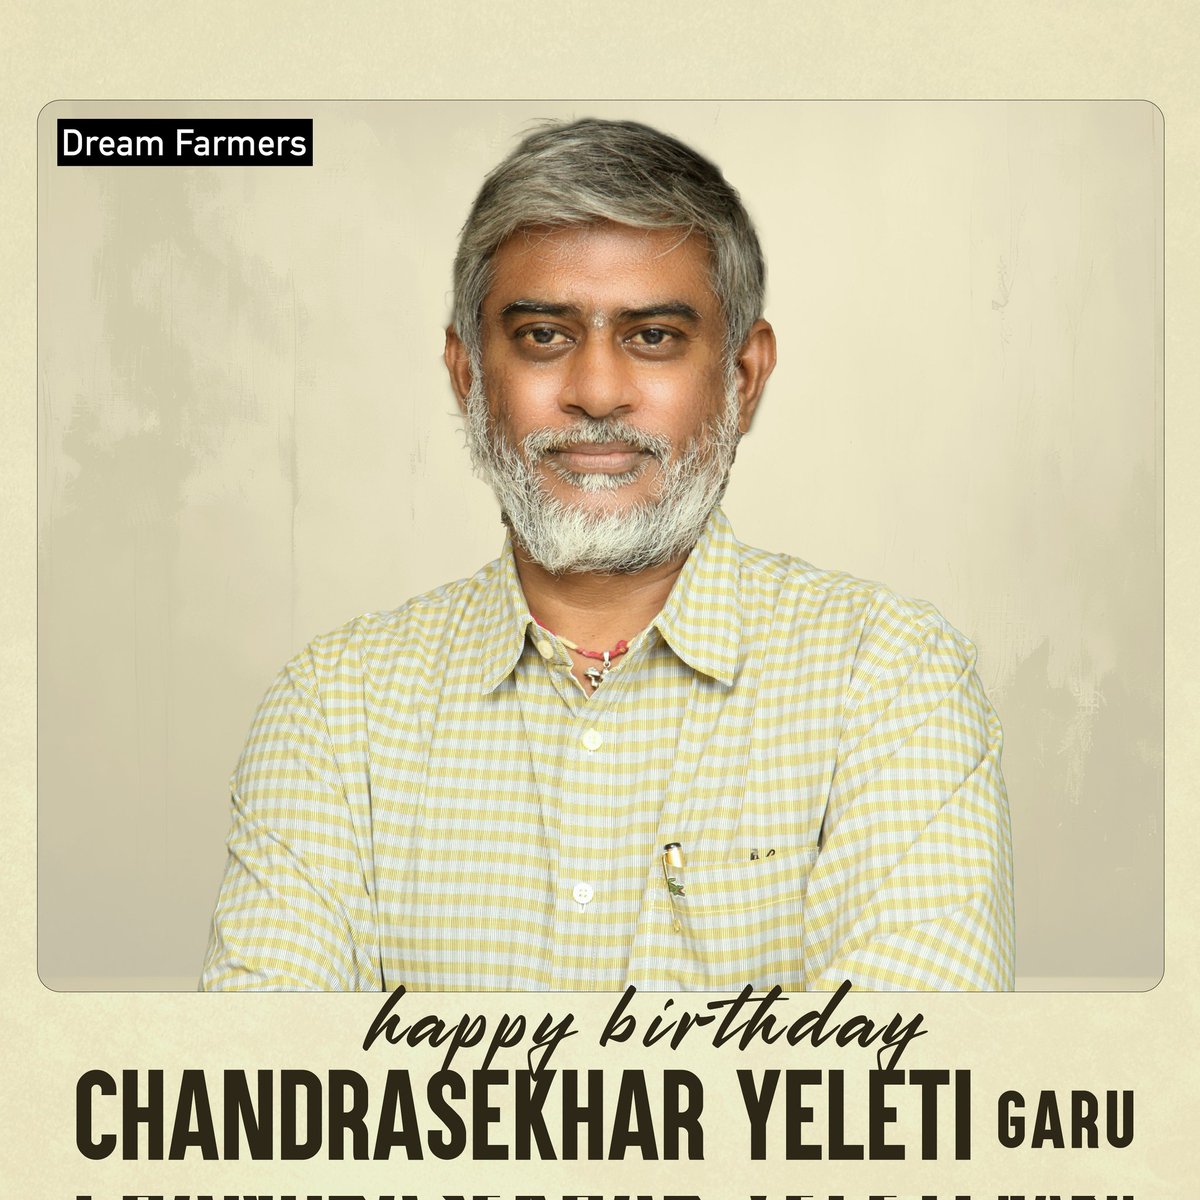 Happy birthday to the visionary filmmaker @yeletics garu! Your storytelling brilliance continues to captivate audiences, and your cinematic contributions inspire generations. Wishing you a year filled with creativity and success! 🎥✨ #HBDChandrashekharYeleti